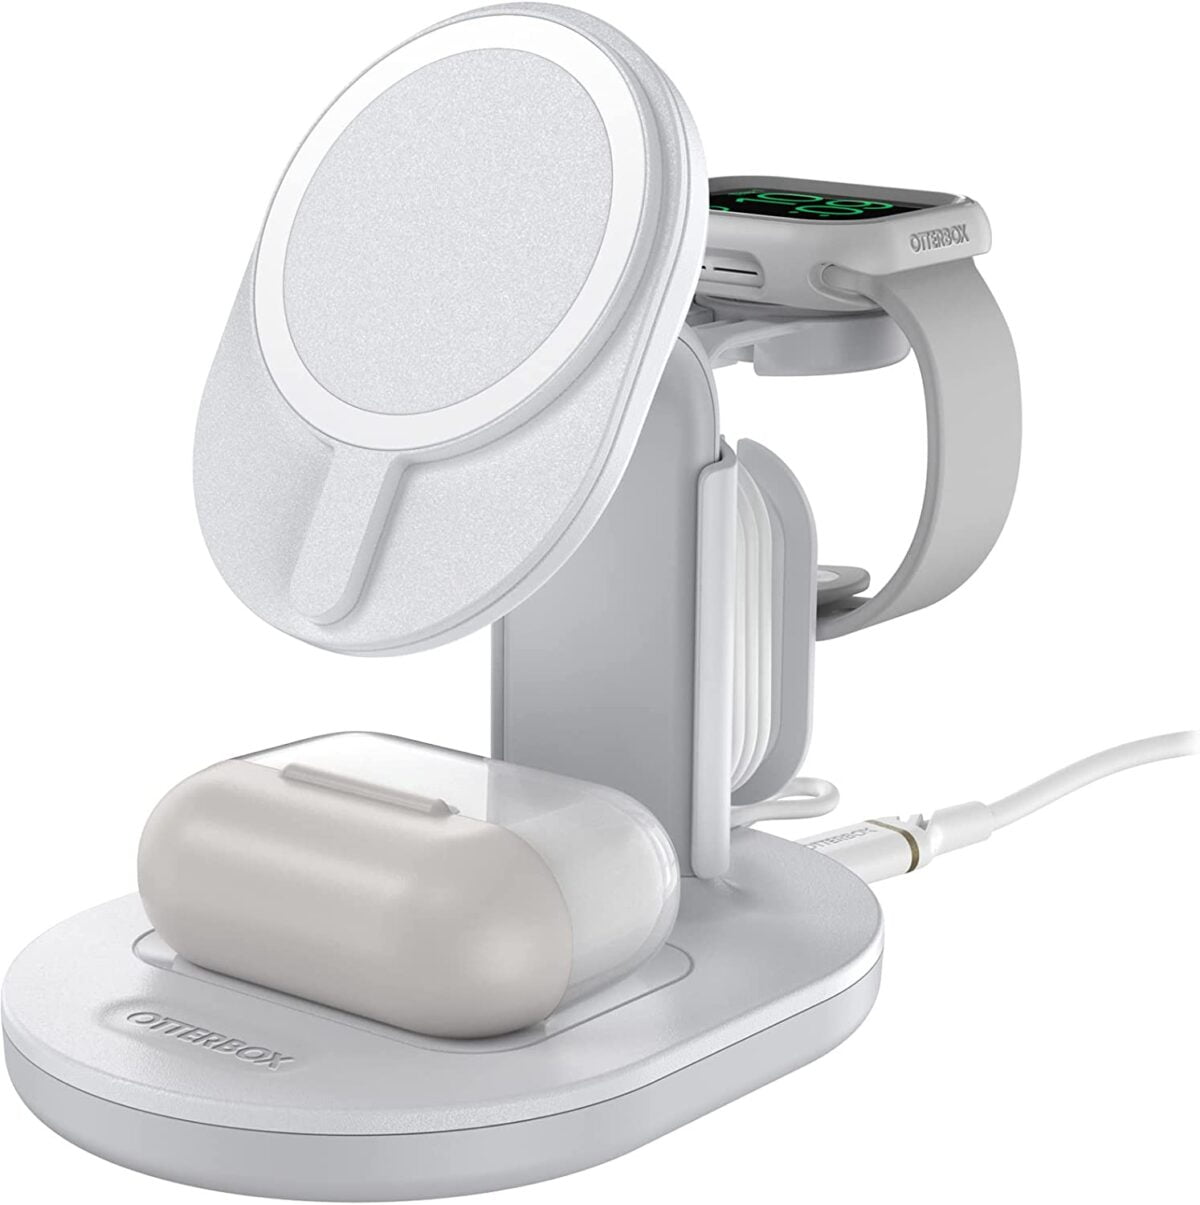 OtterBox 3-in-1 Wireless Charging Station 2.0 for MagSafe listed on Amazon US